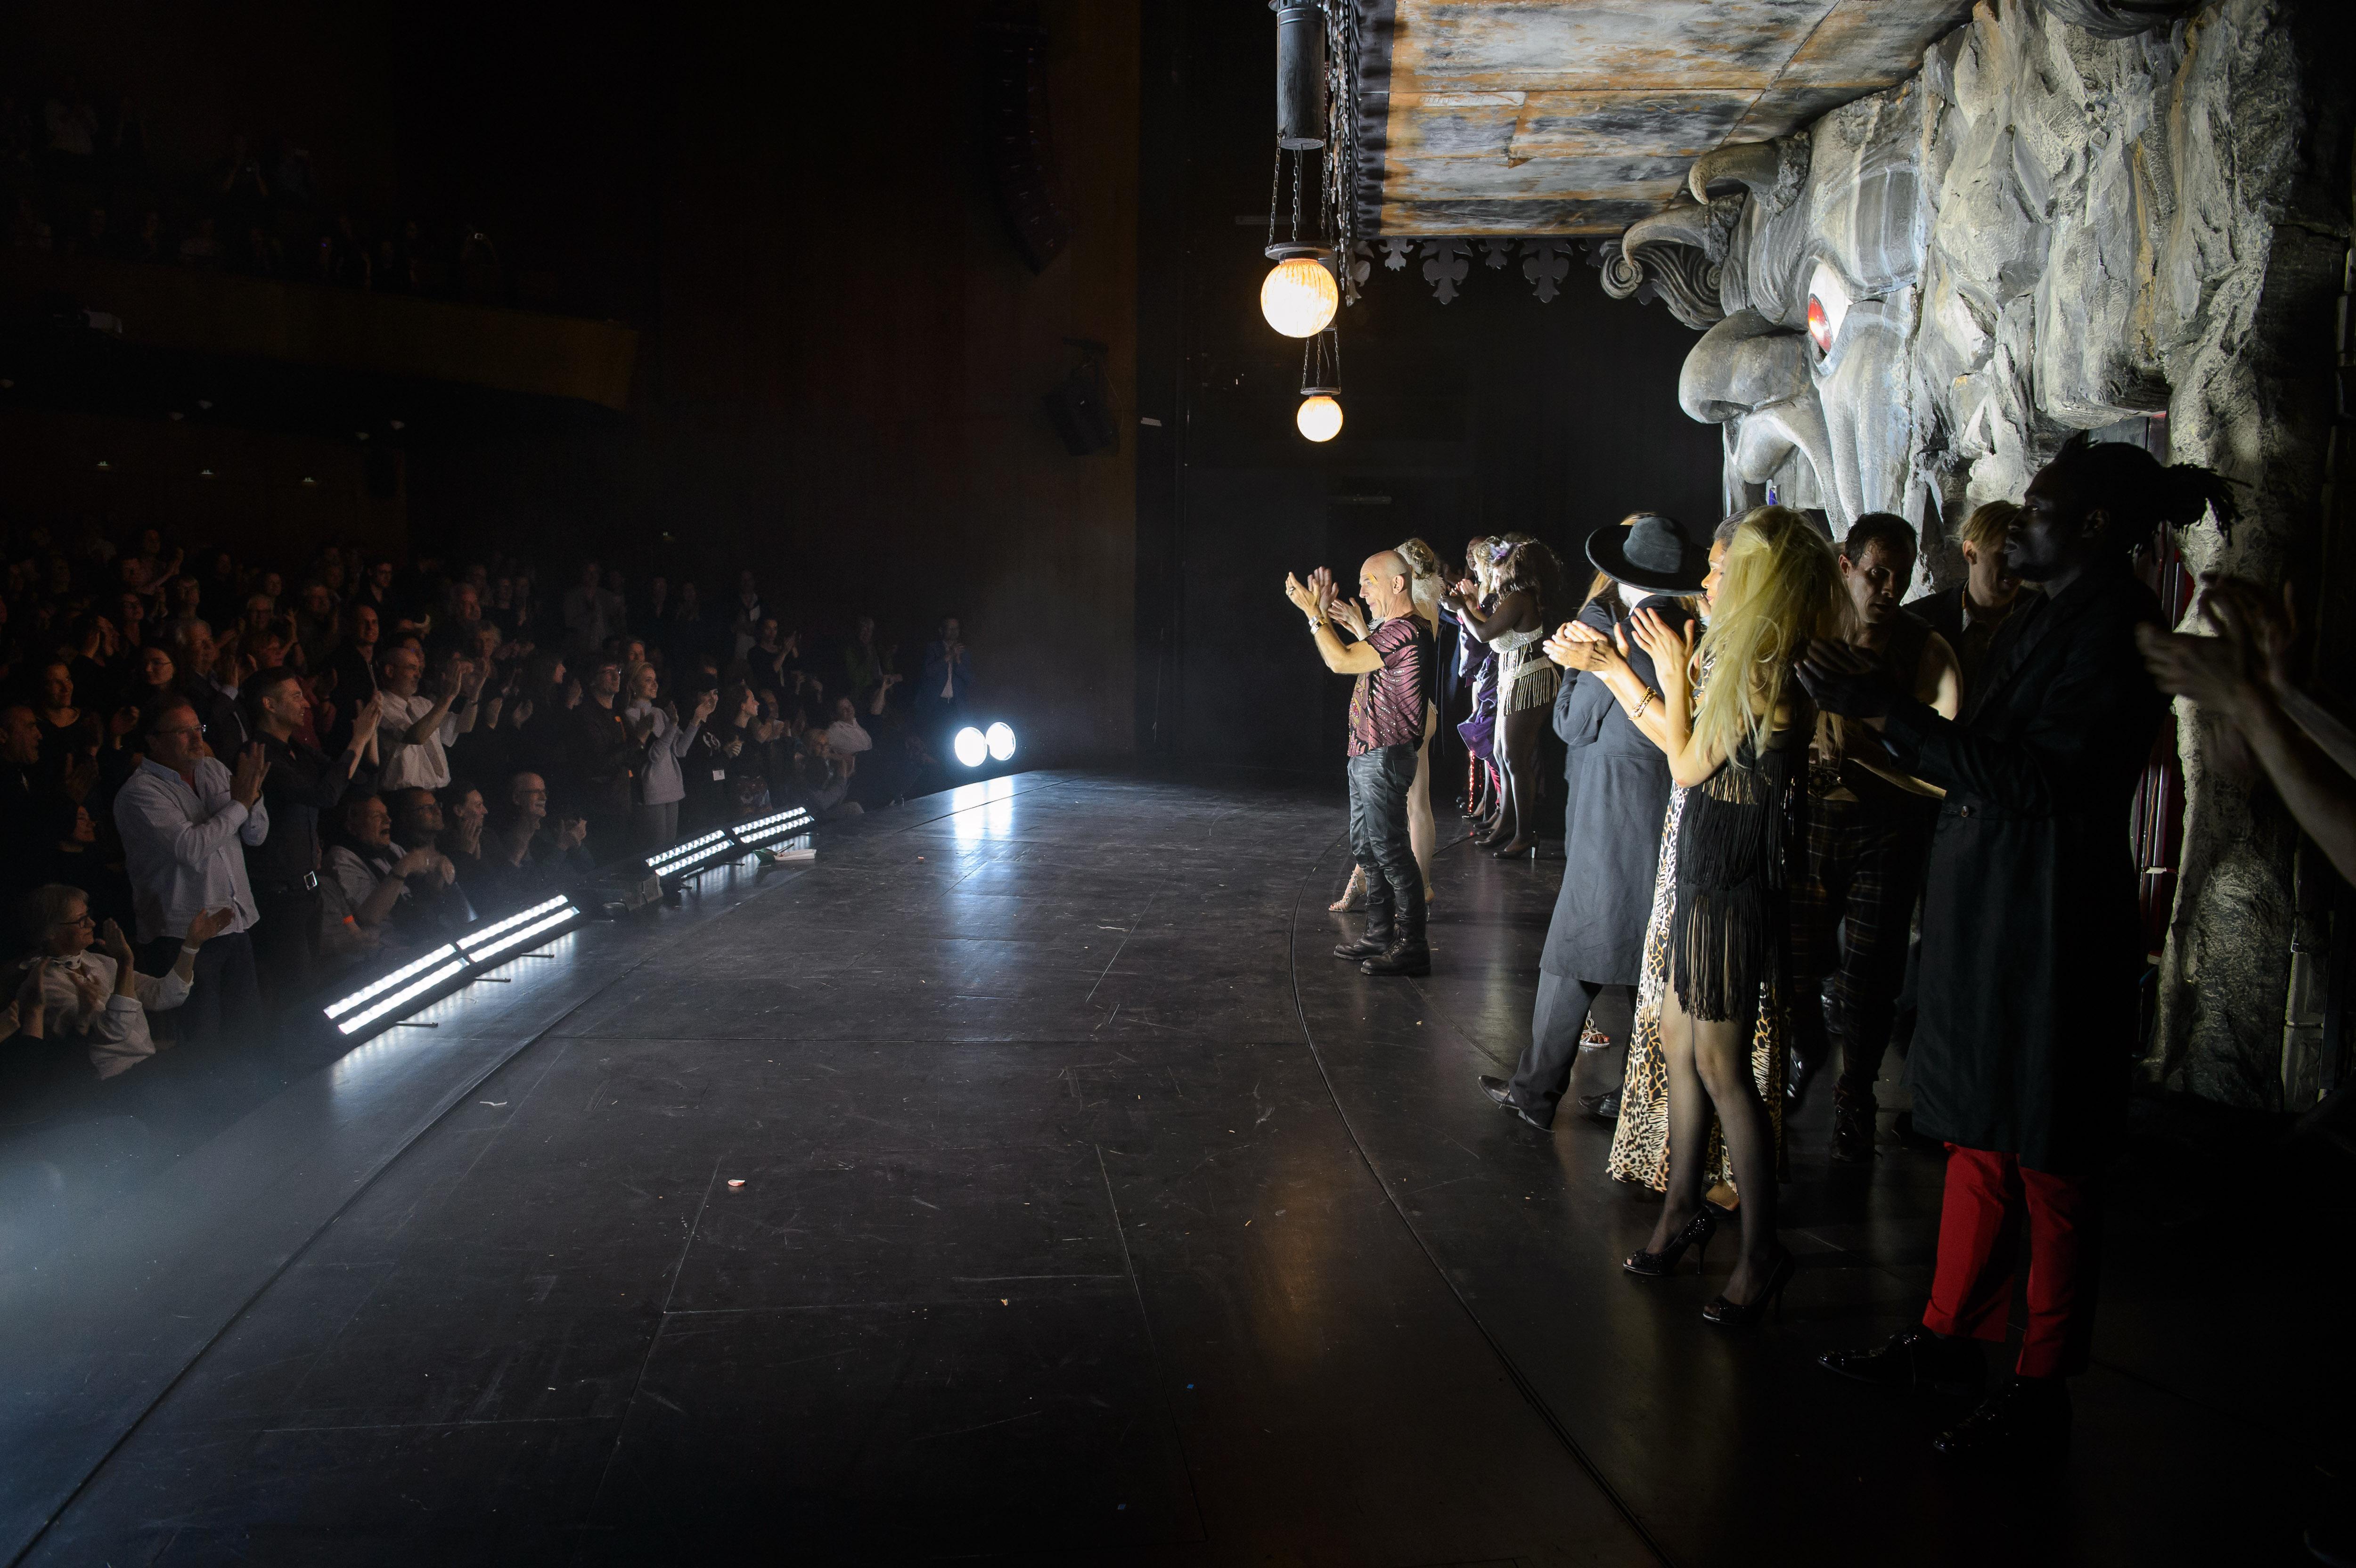 Actors on stage during the final applause. The audience applauds standing.